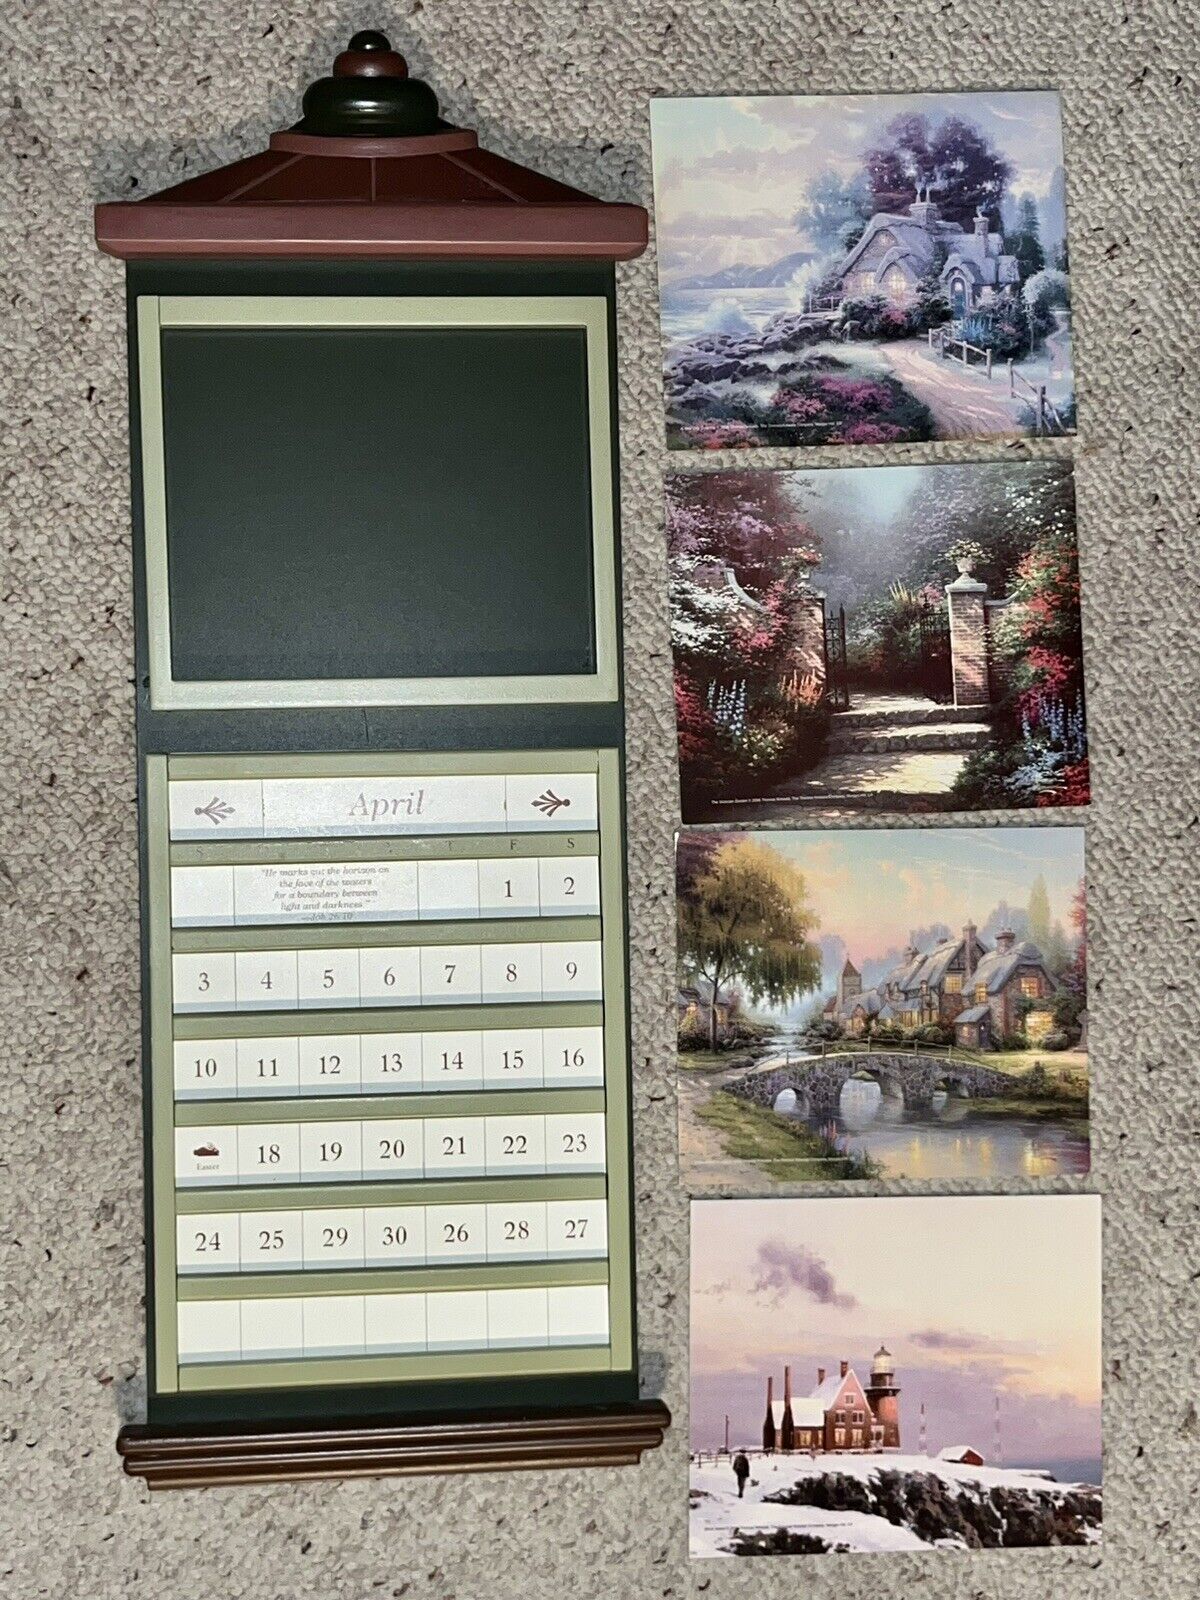 2006 THOMAS KINKADE WOODEN PERPETUAL WALL CALENDAR 4 PICTURES INCOMPLETE TILES *